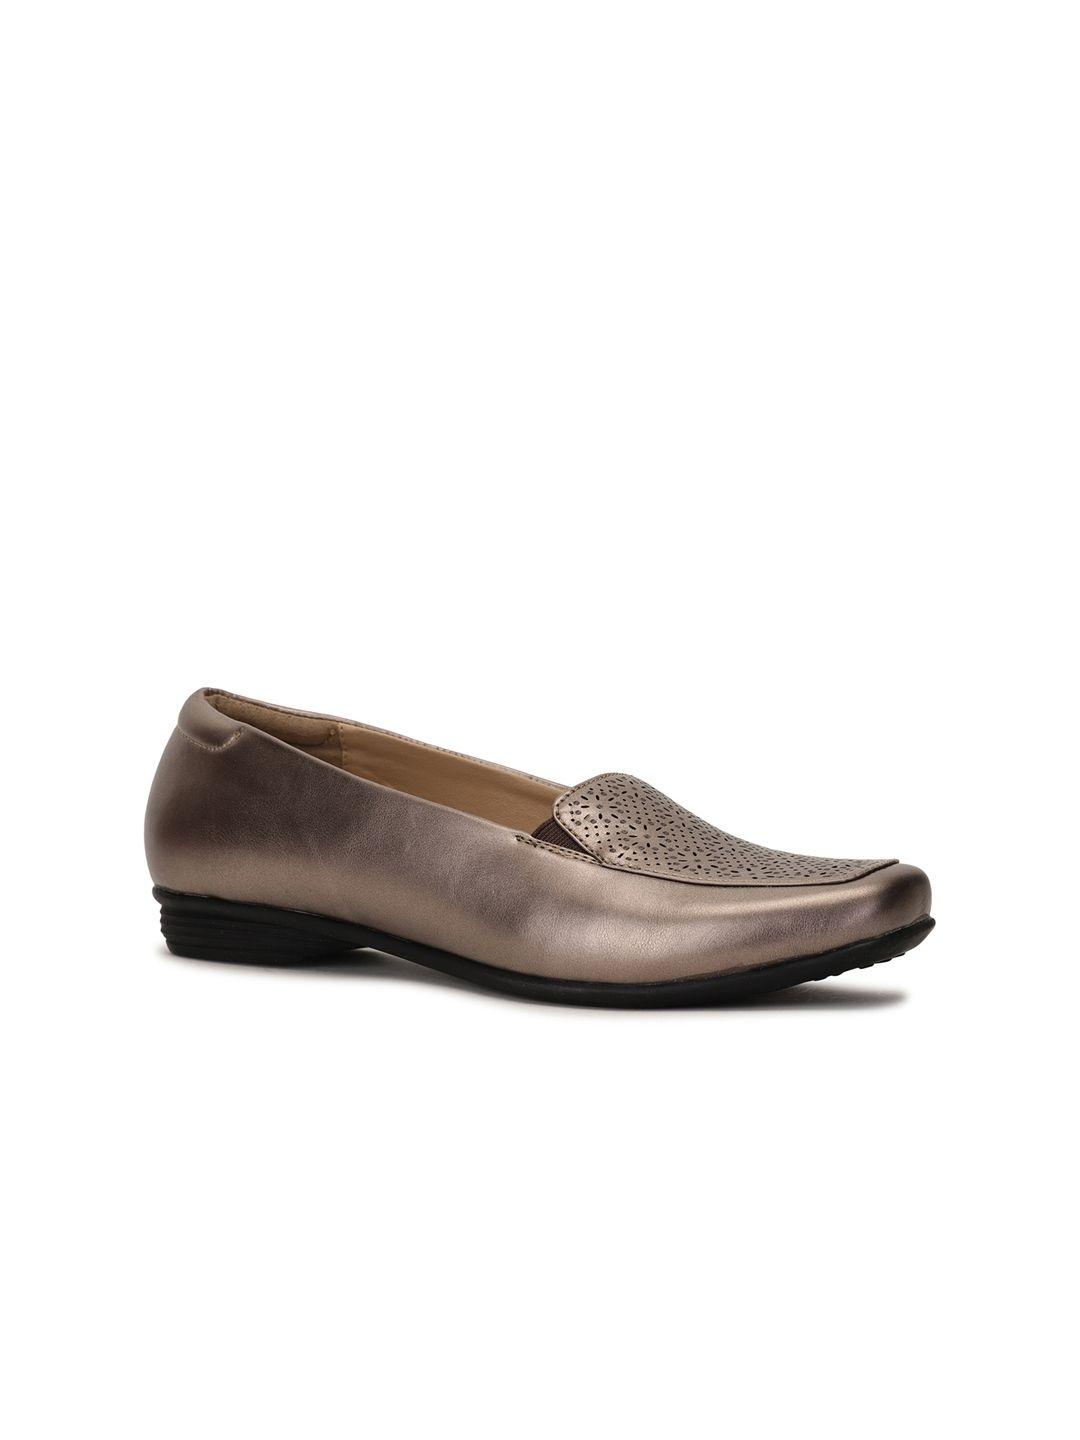 bata women gunmetal-toned textured leather party ballerinas with laser cuts flats